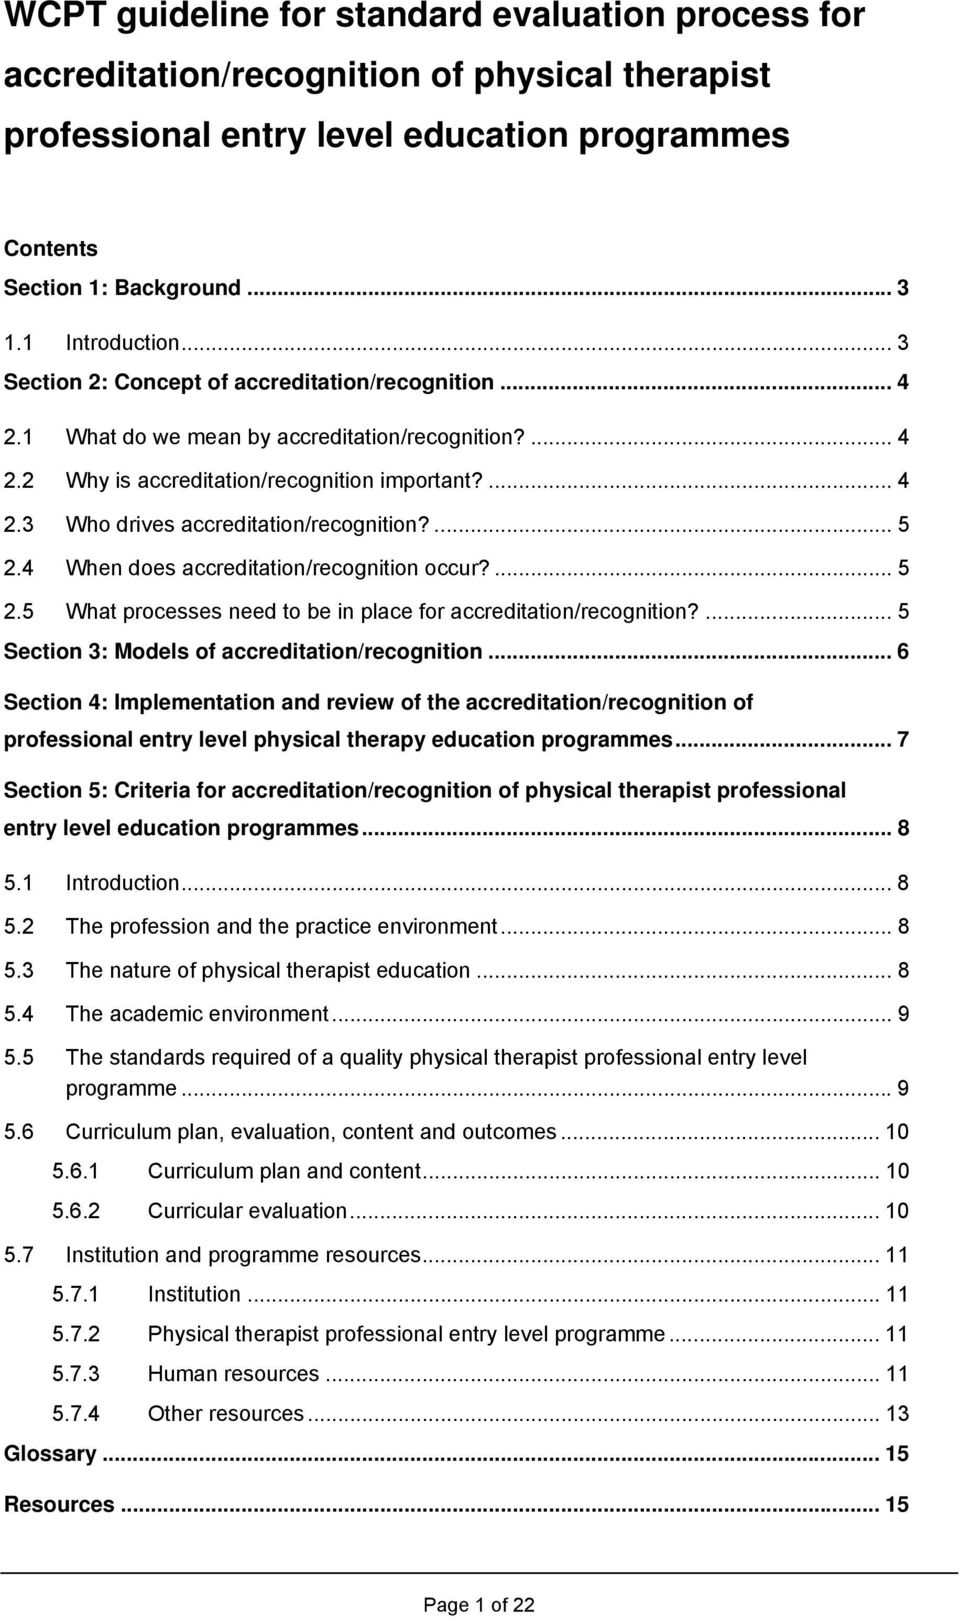 ... 5 2.4 When does accreditation/recognition occur?... 5 2.5 What processes need to be in place for accreditation/recognition?... 5 Section 3: Models of accreditation/recognition.